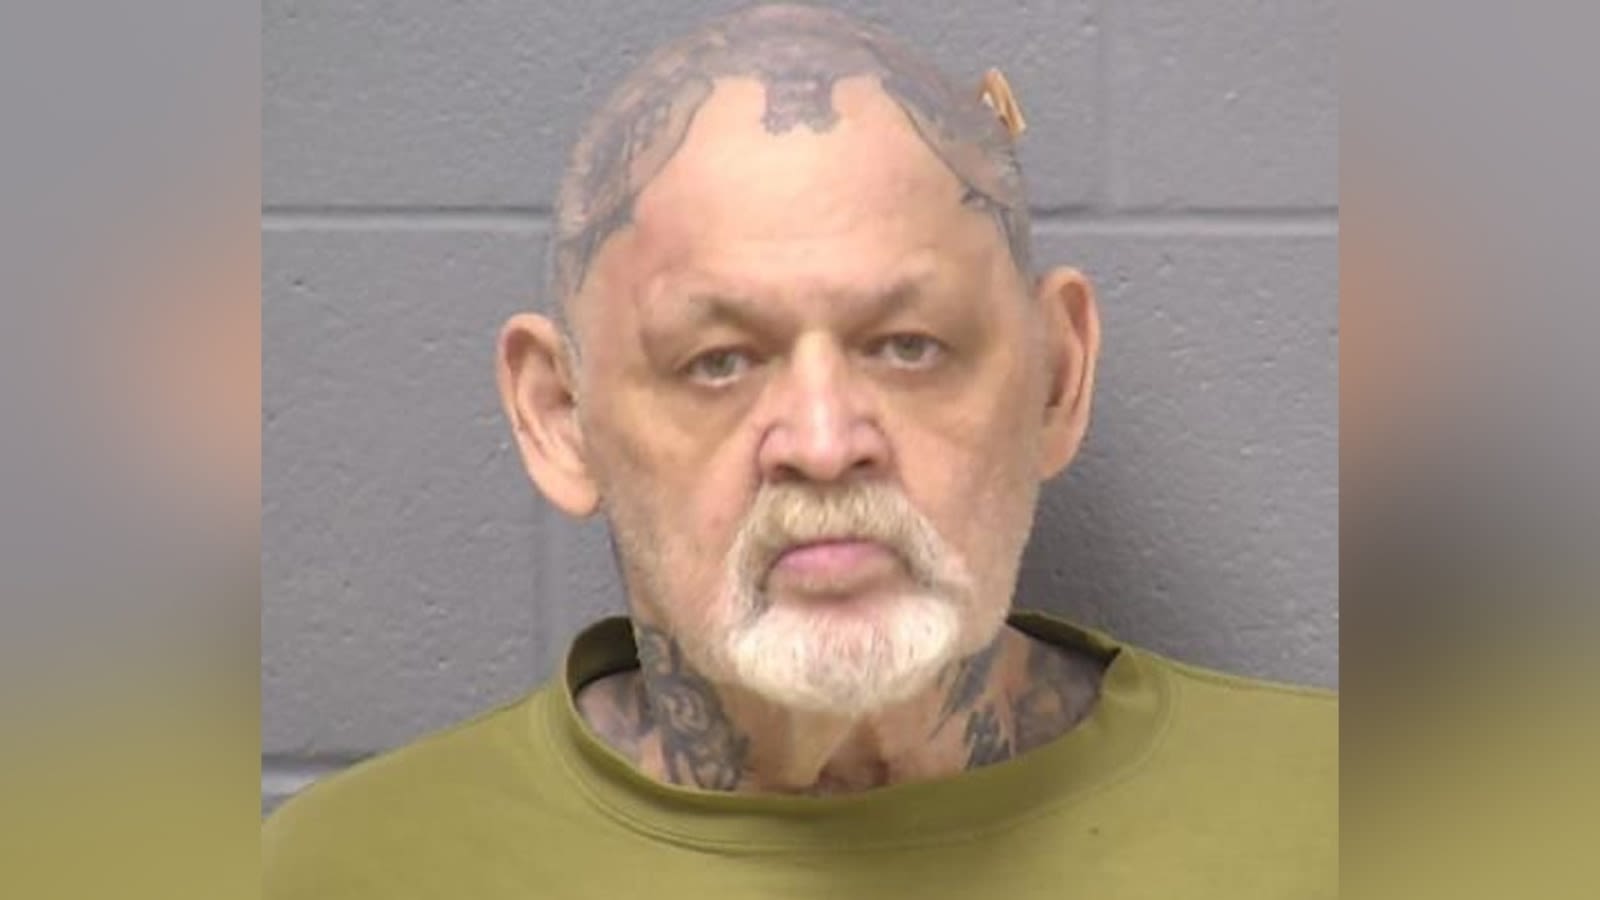 Illinois man charged with attempted first-degree murder of neighbor in apparent 'racially motivated' shooting: Sheriff